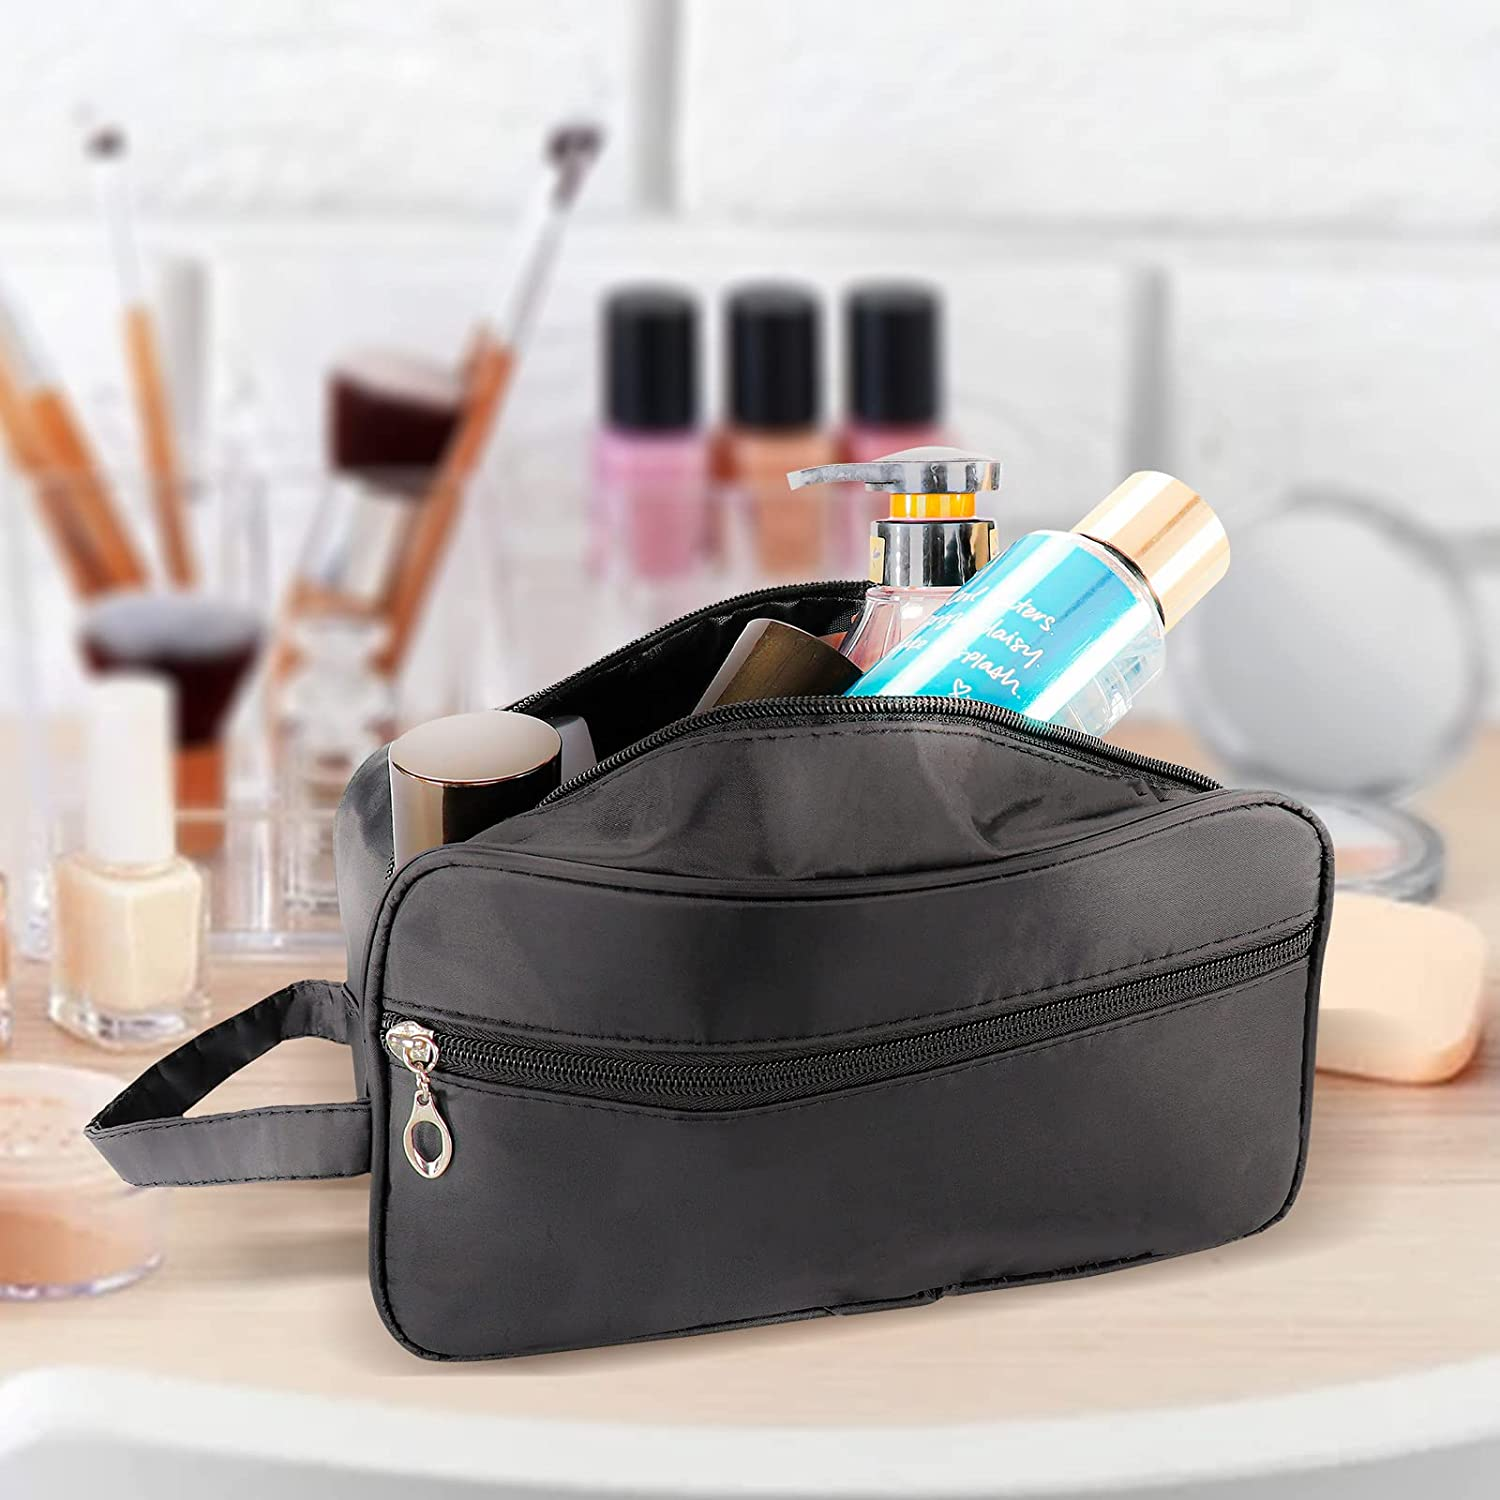 Travel Toiletry Bag for Women and Men, Large Lightweight Hanging Water-Resistant Shaving Bag with Handle, Foldable Storage Bags for Cosmetics, Toiletries Brushes Tools, Travel Accessories (Black)